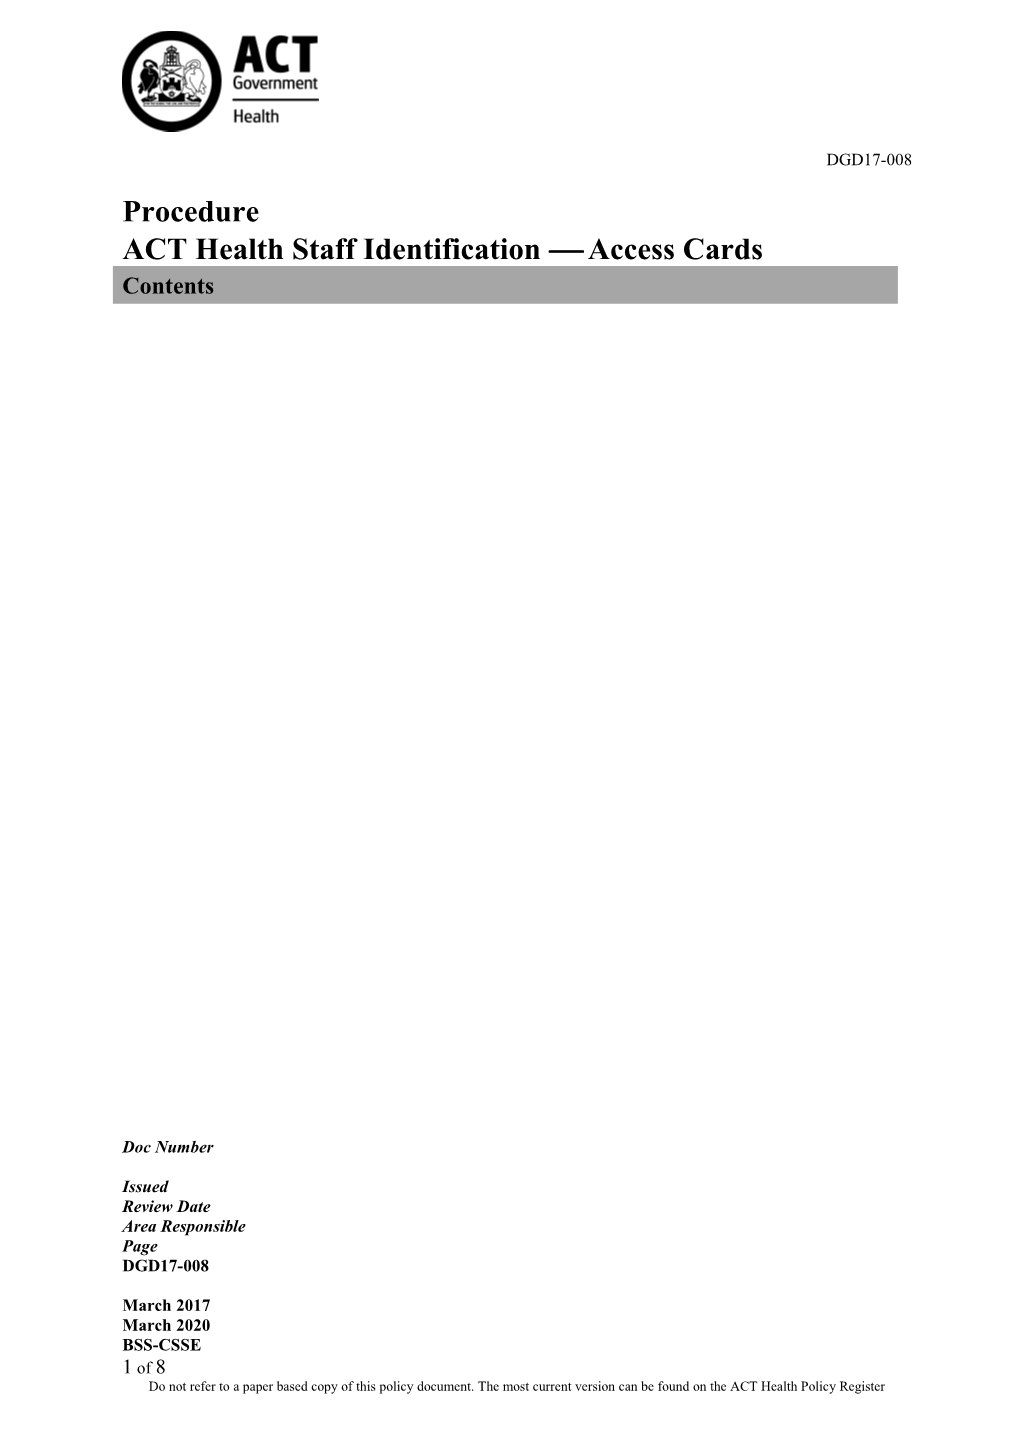 ACT Health Staff Identification Access Cards Procedure